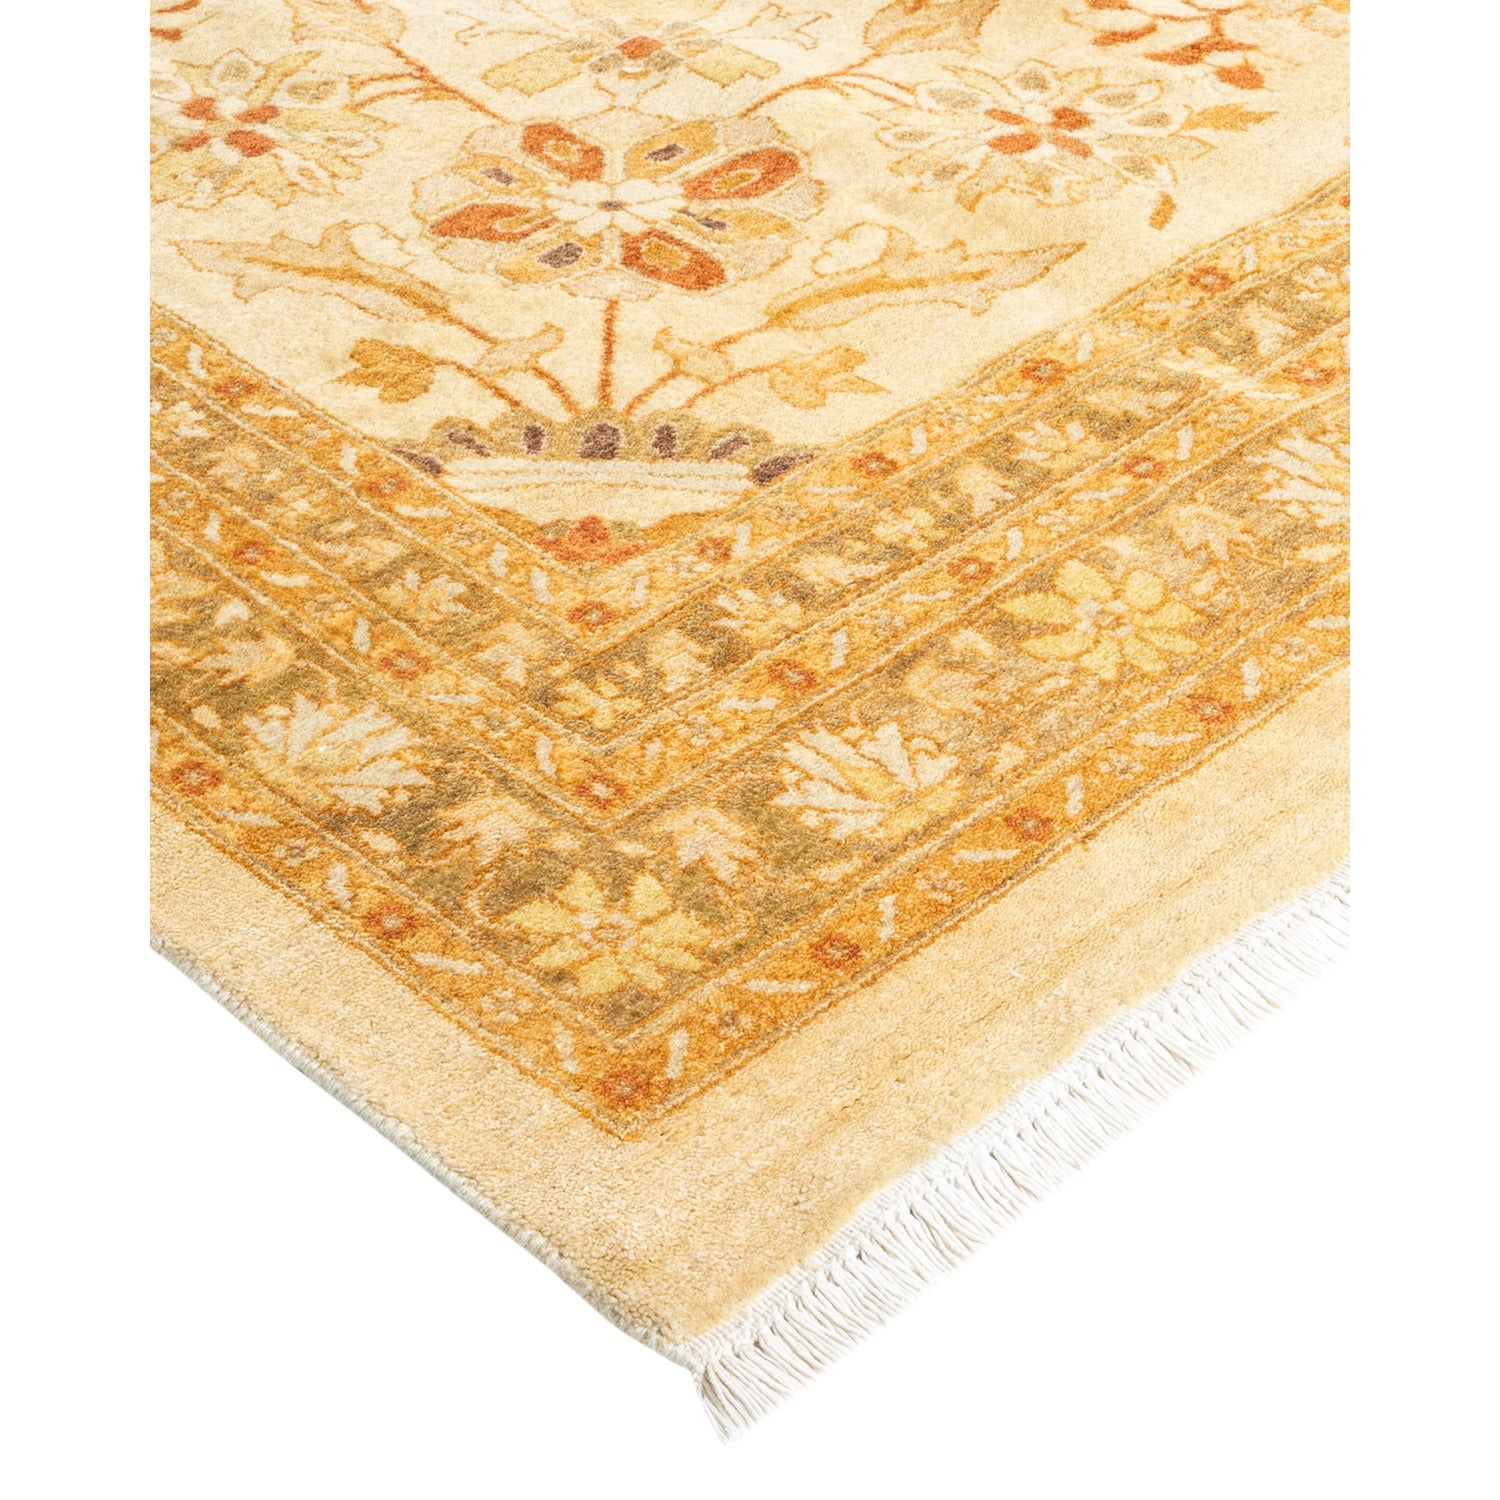 Exquisite hand-woven carpet with intricate Oriental-inspired design and fringe.